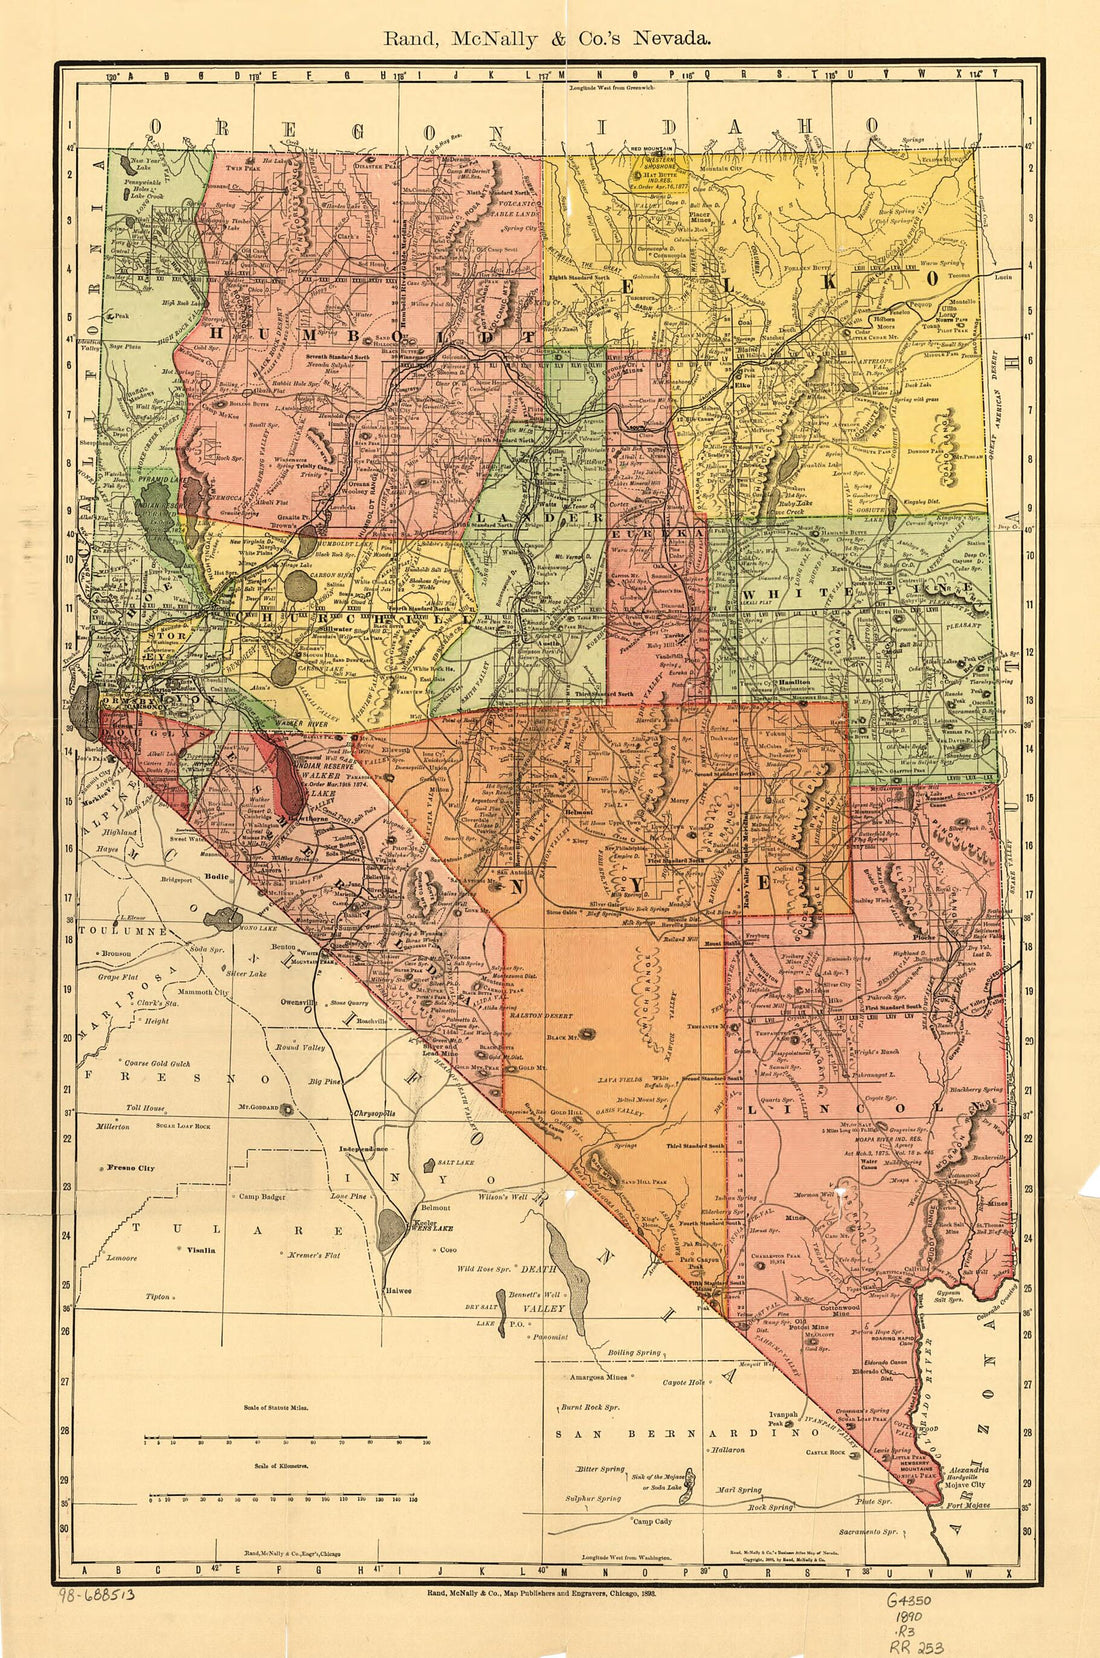 This old map of Indexed County and Township Pocket Map and Shippers Guide of Nevada, Accompanied by a New and Origianl Compilation and Ready Reference Index, Showing In Detail the Entire Railroad Network from 1893 was created by  Rand McNally and Company in 1893